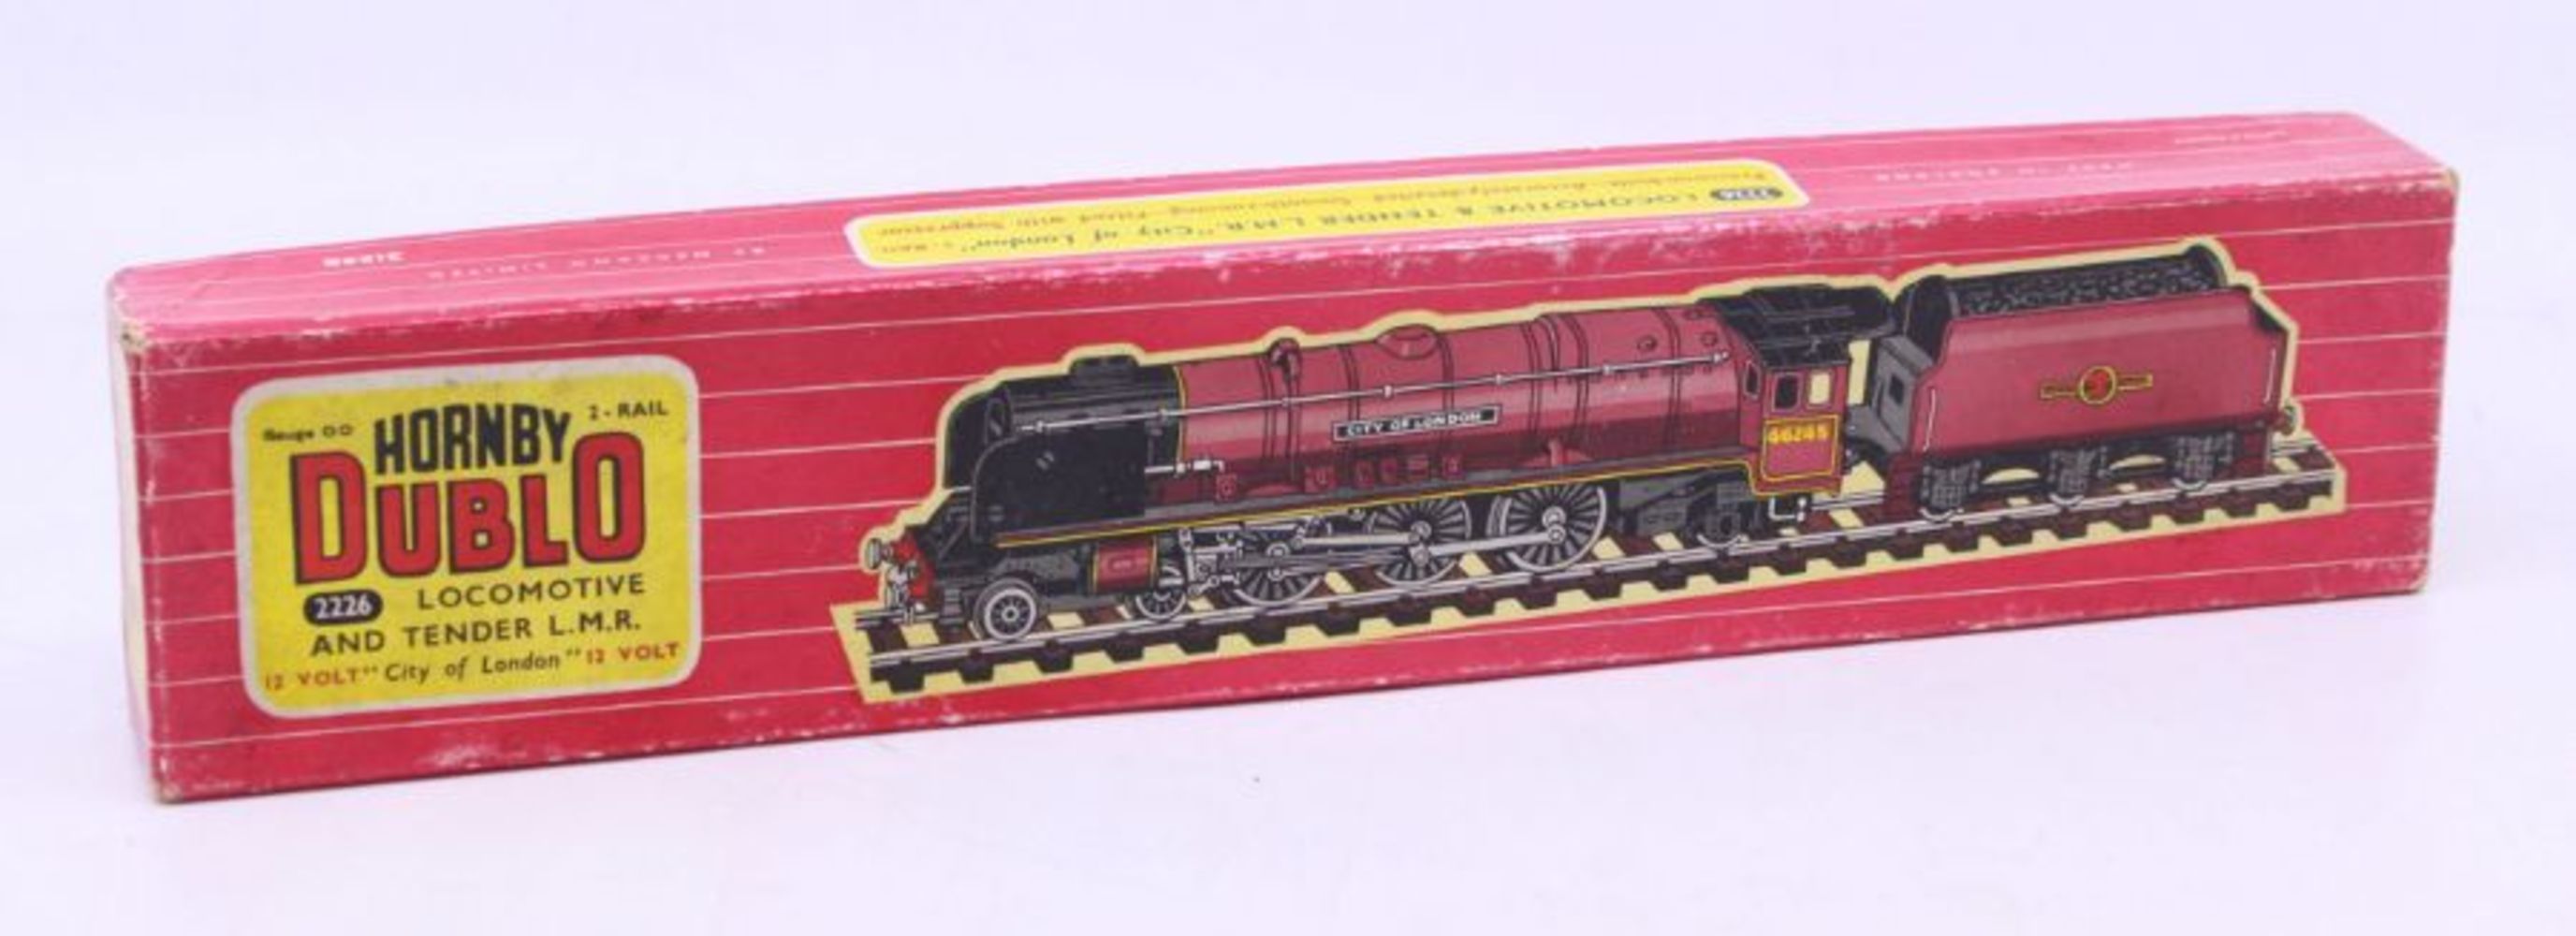 The Davidge Model Railway Collection Part 1 - Webcast Only - Postage and Safe Click/Collect Only